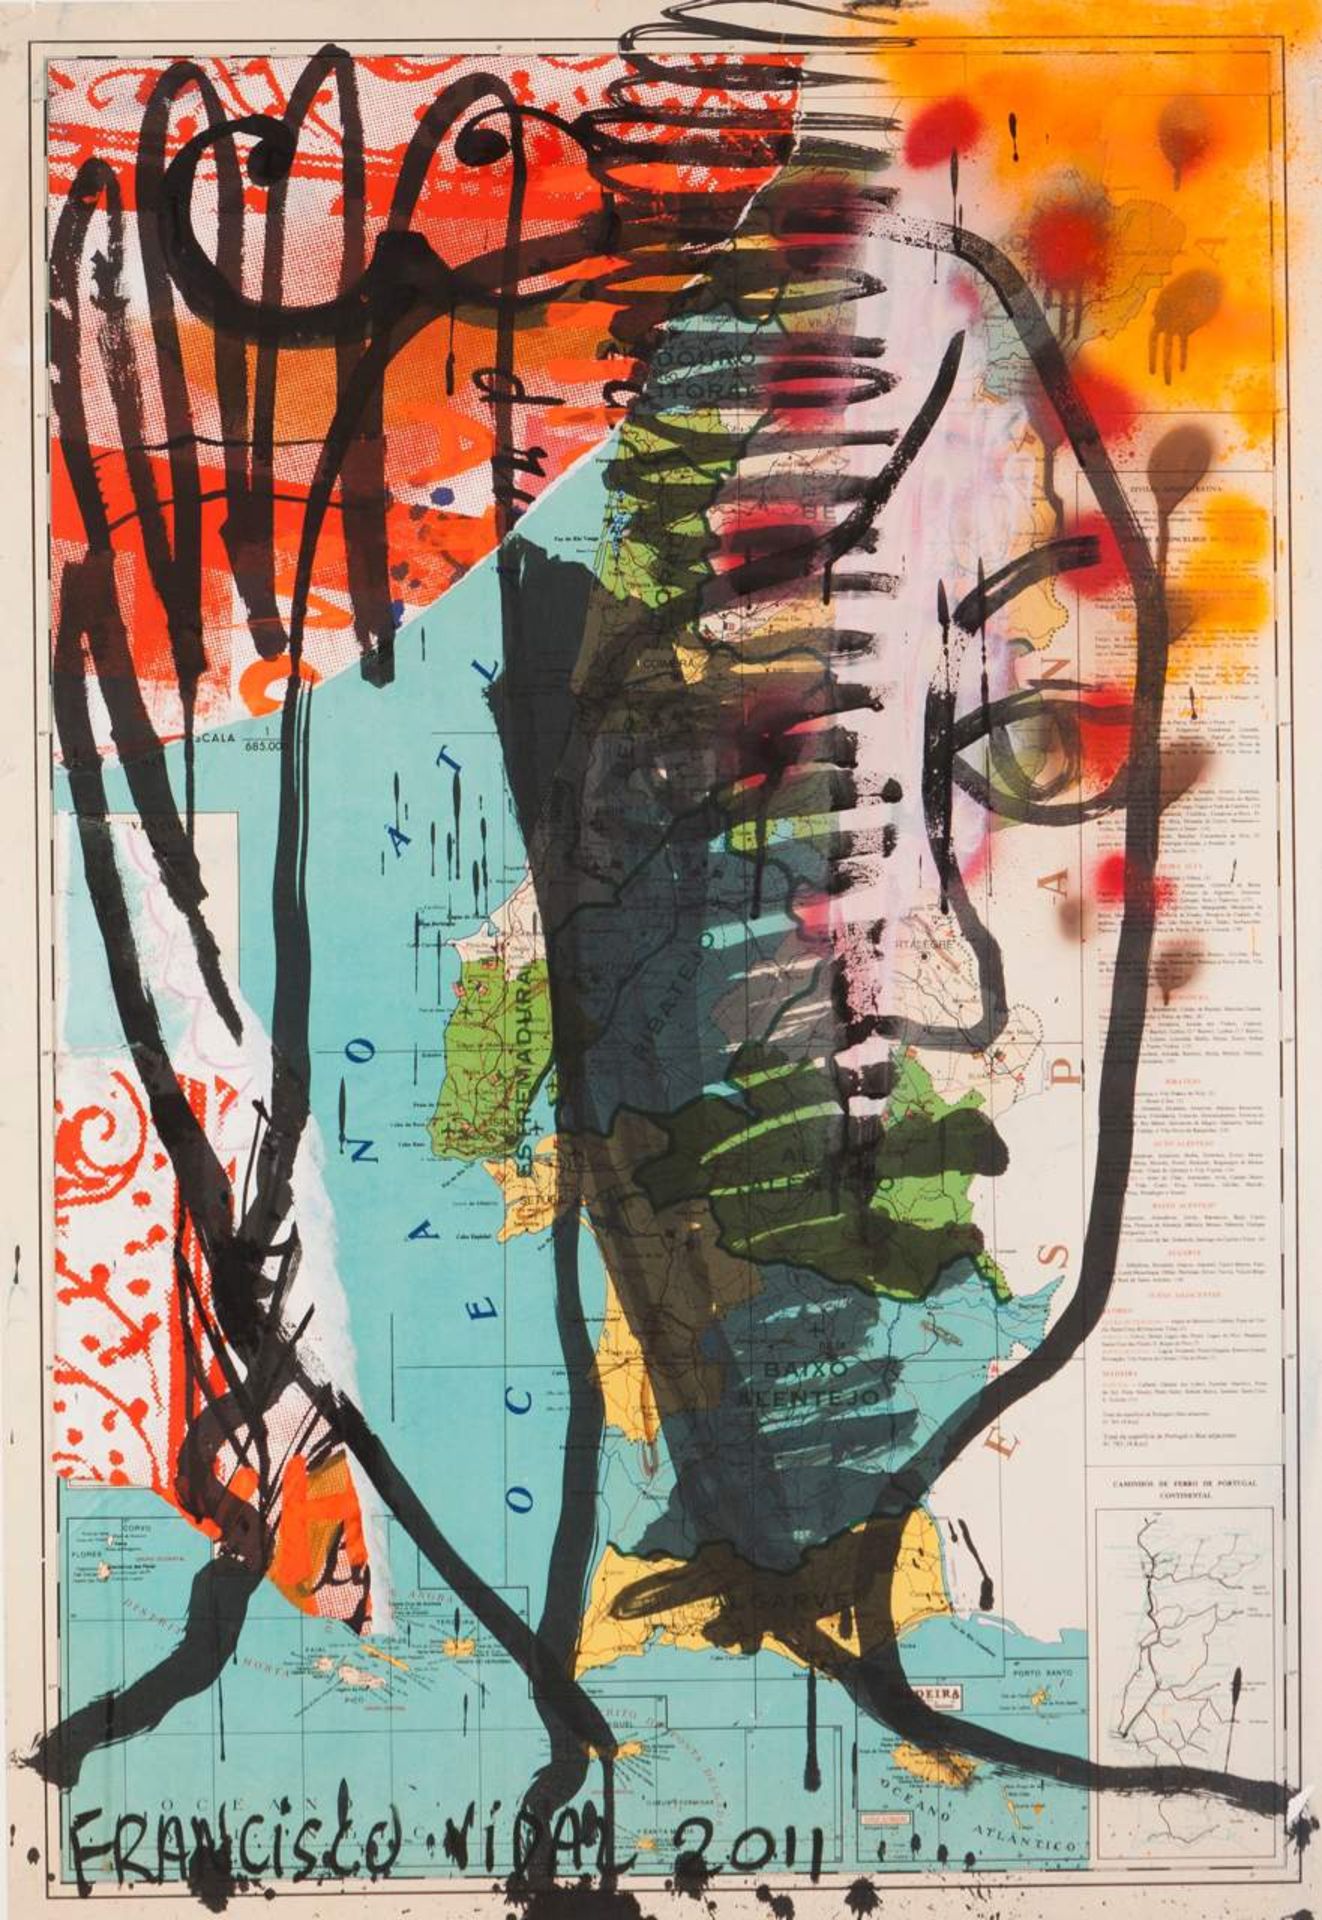 Francisco Vidal (b.1978)
Untitled
Mixed media on paper
Signed and dated 2011

98x68 cm